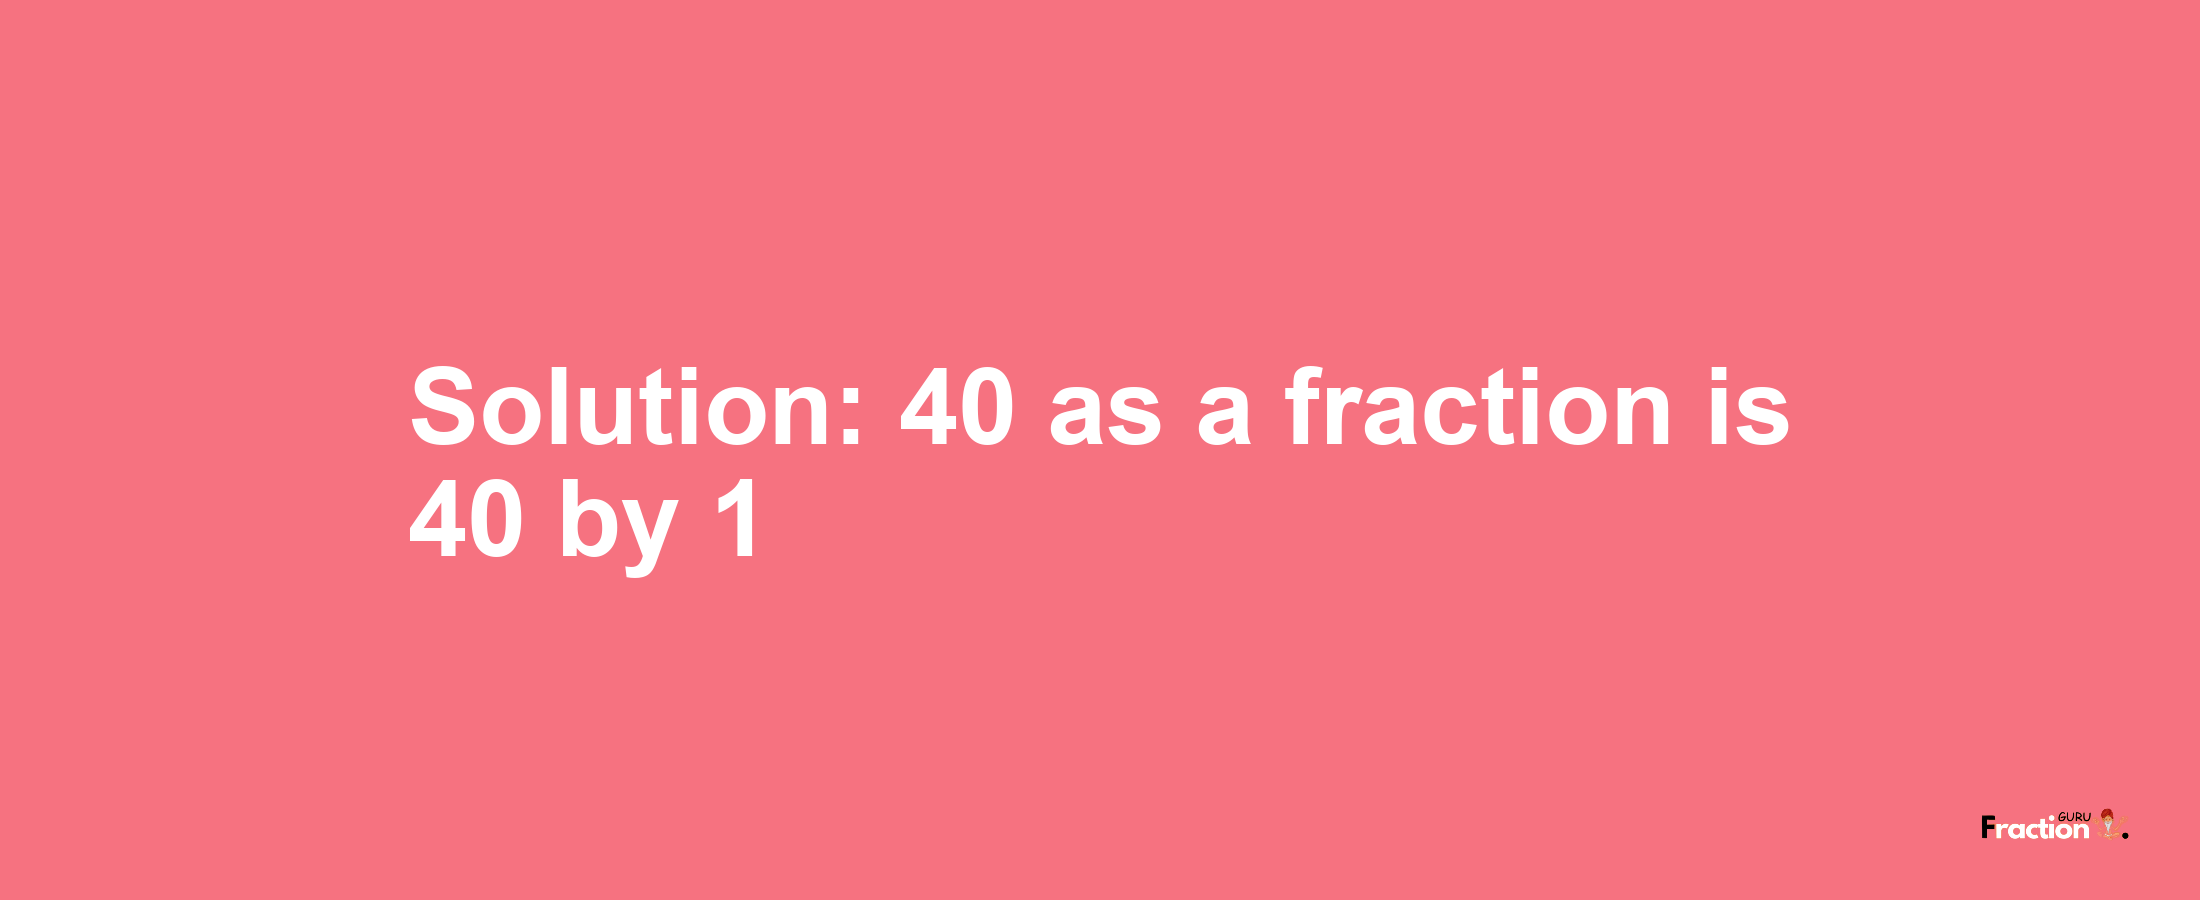 Solution:40 as a fraction is 40/1